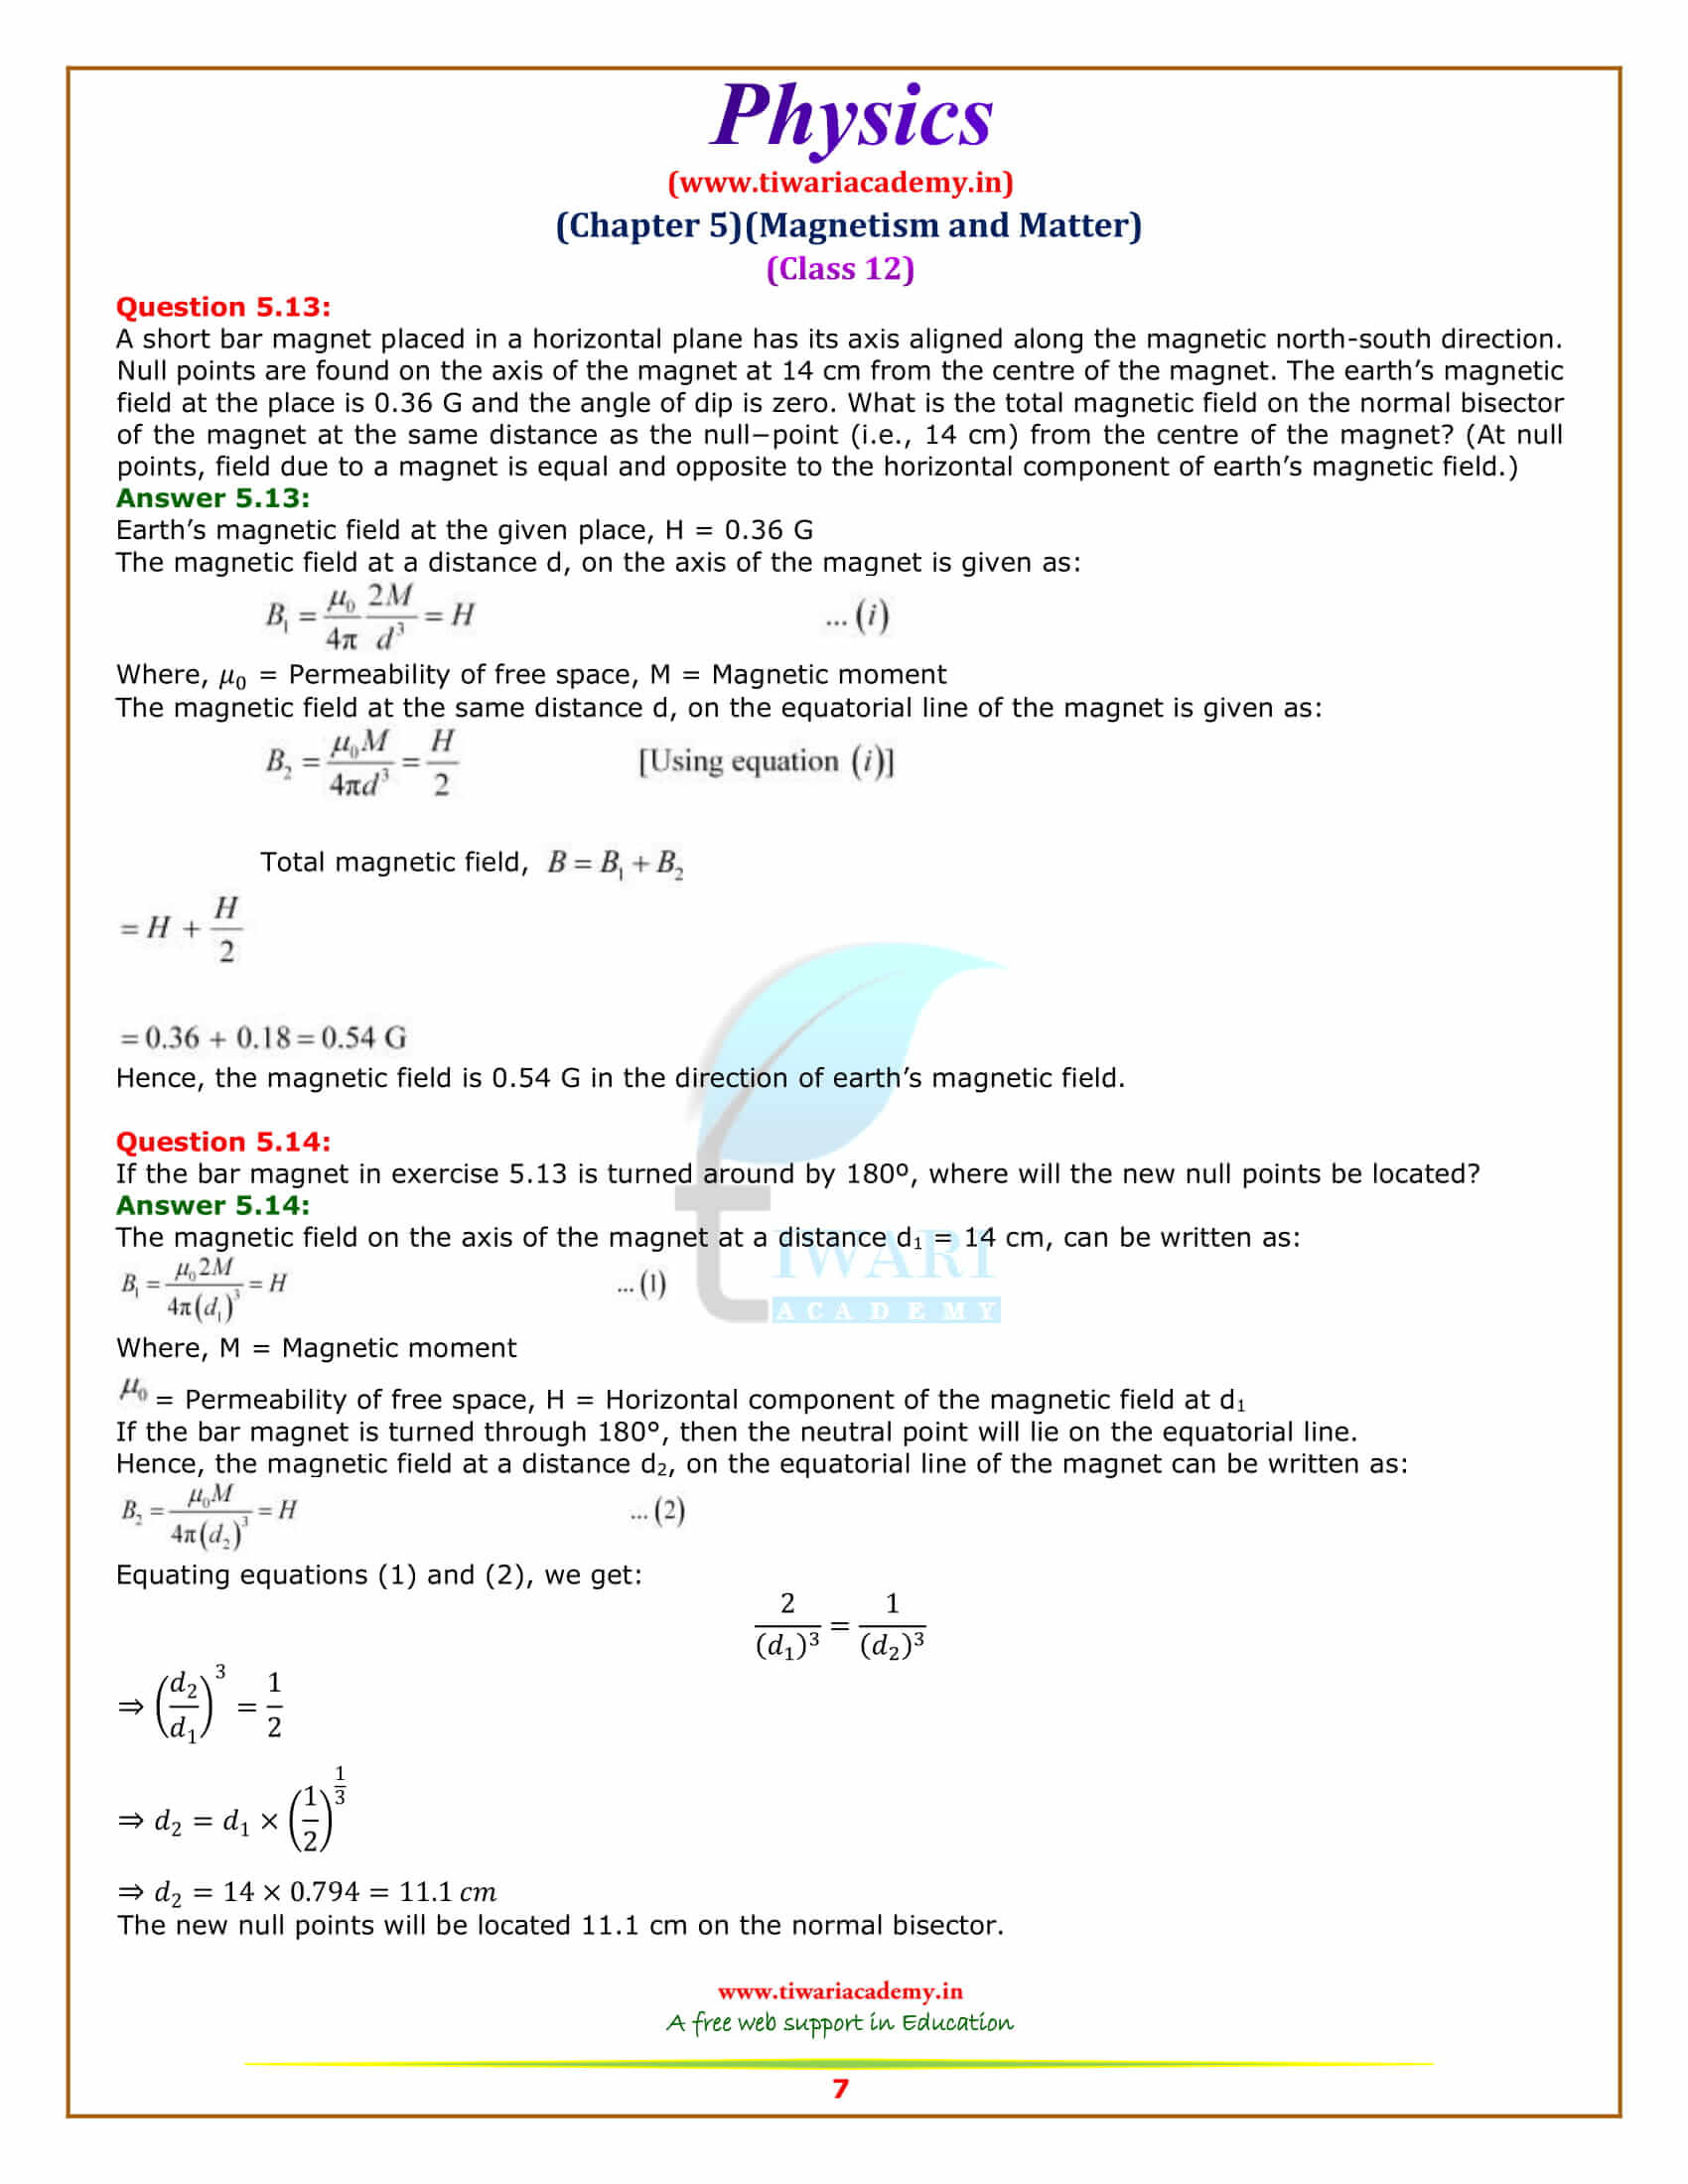 NCERT Solutions for Class 12 Physics Chapter 5 in pdf free download